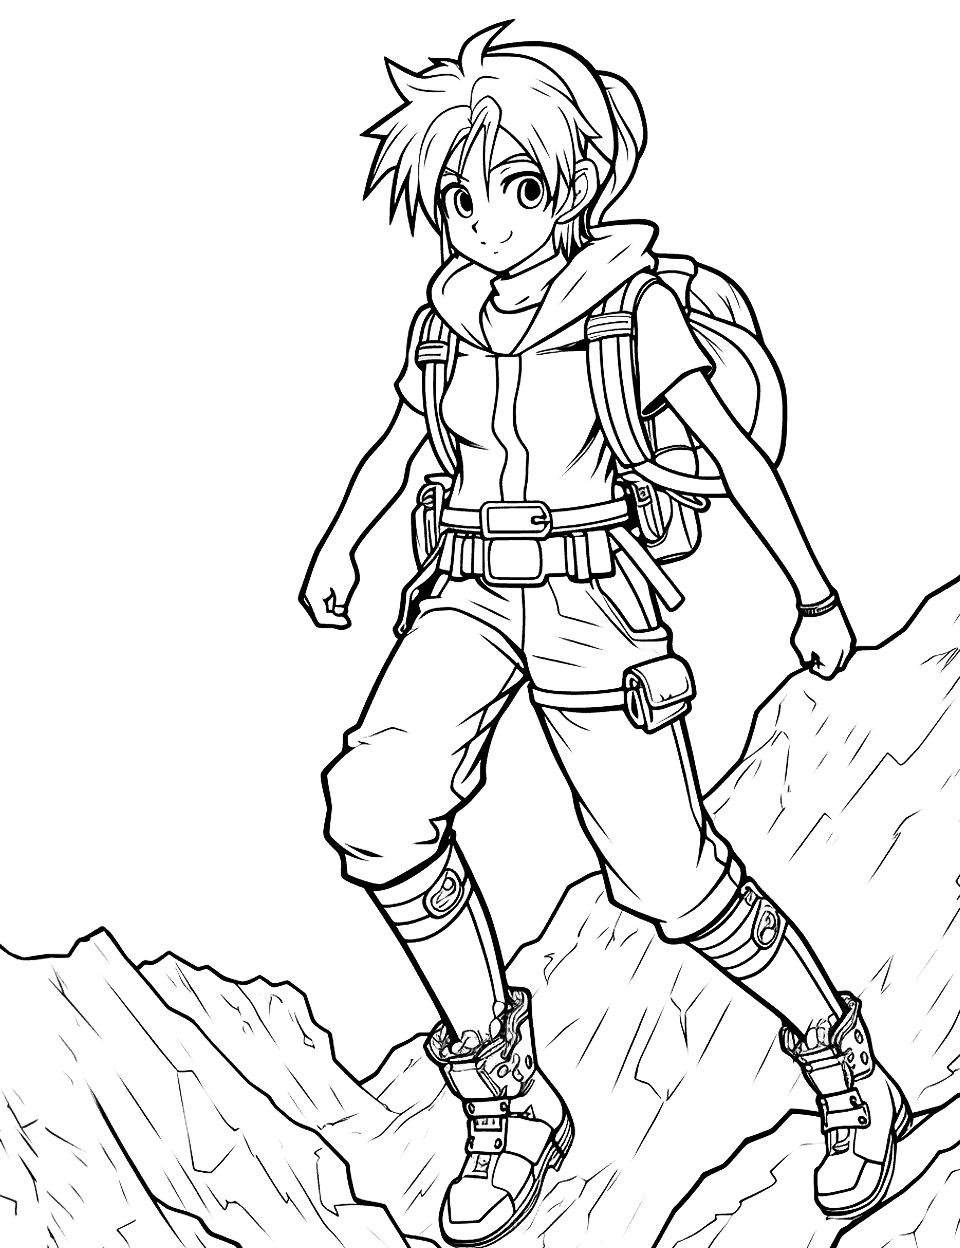 Anime Adventure Coloring Page - A coloring page of anime boy embarking on an exciting adventure.